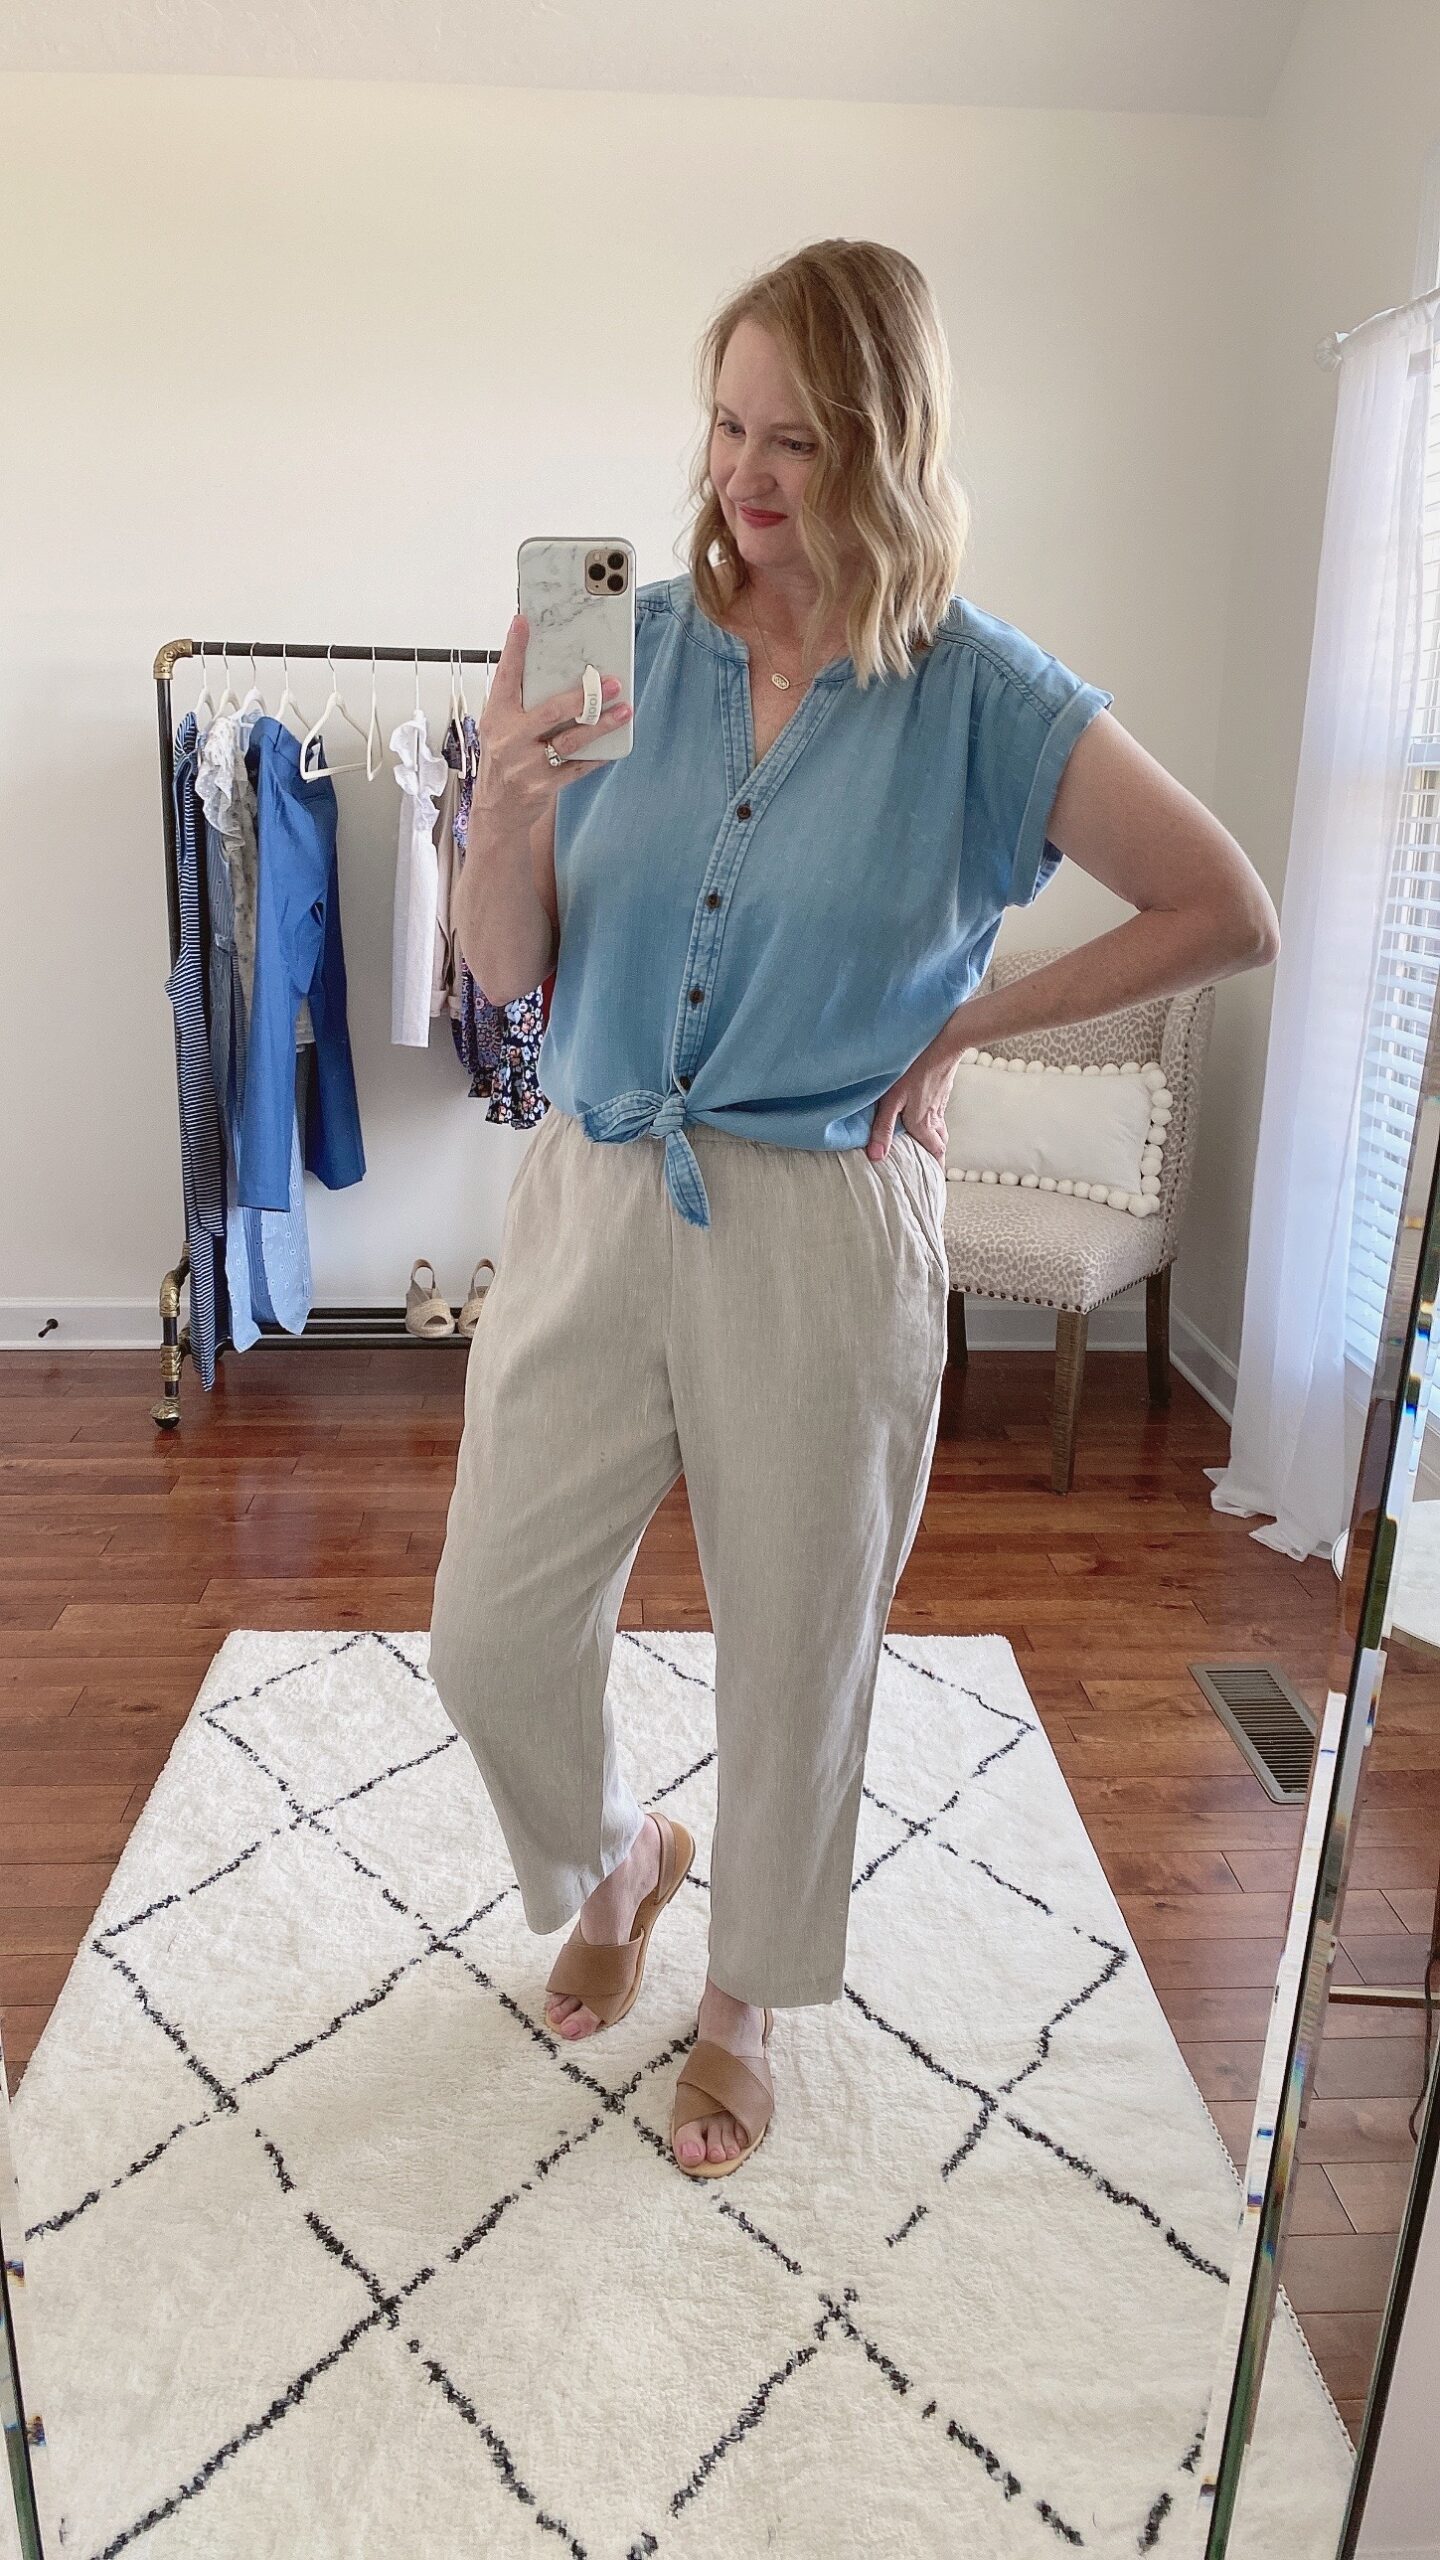 LOFT-NORDSTROM-NISOLO-TRY-ON-OUTFIT-chambray-top-linen-pants